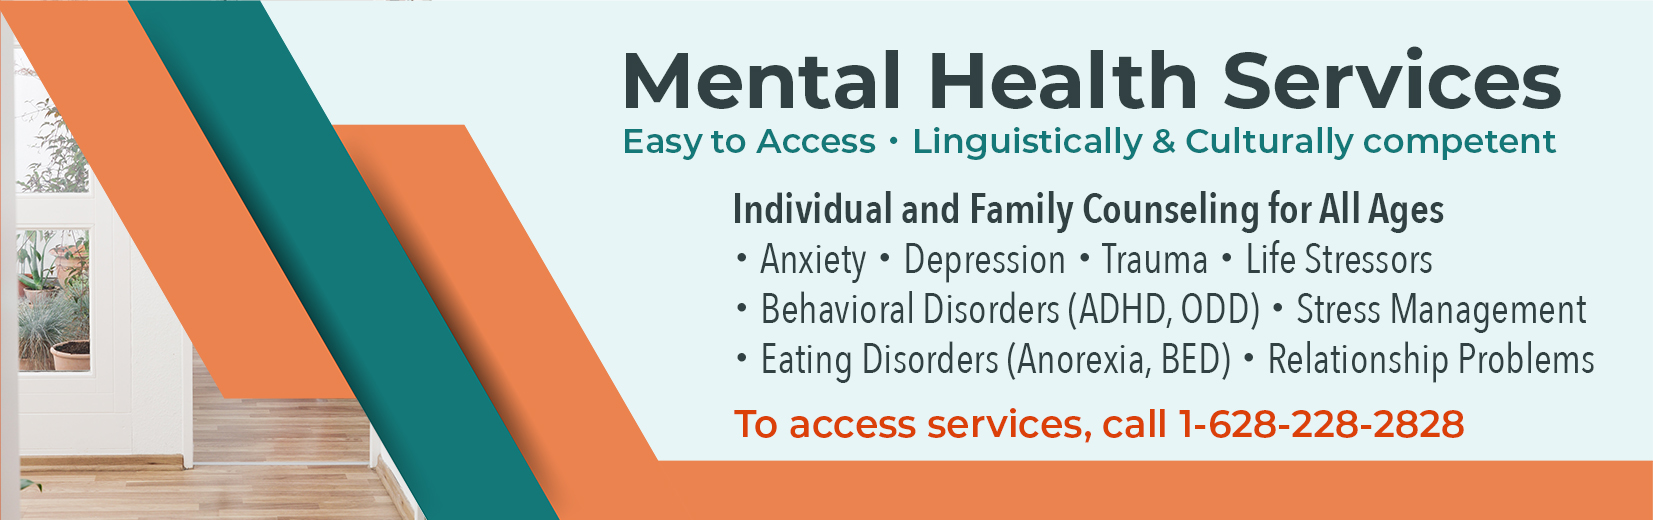 Mental health services banner for website and email. Aim to tell people how to beat the winter blue and seasonal affective disorder.